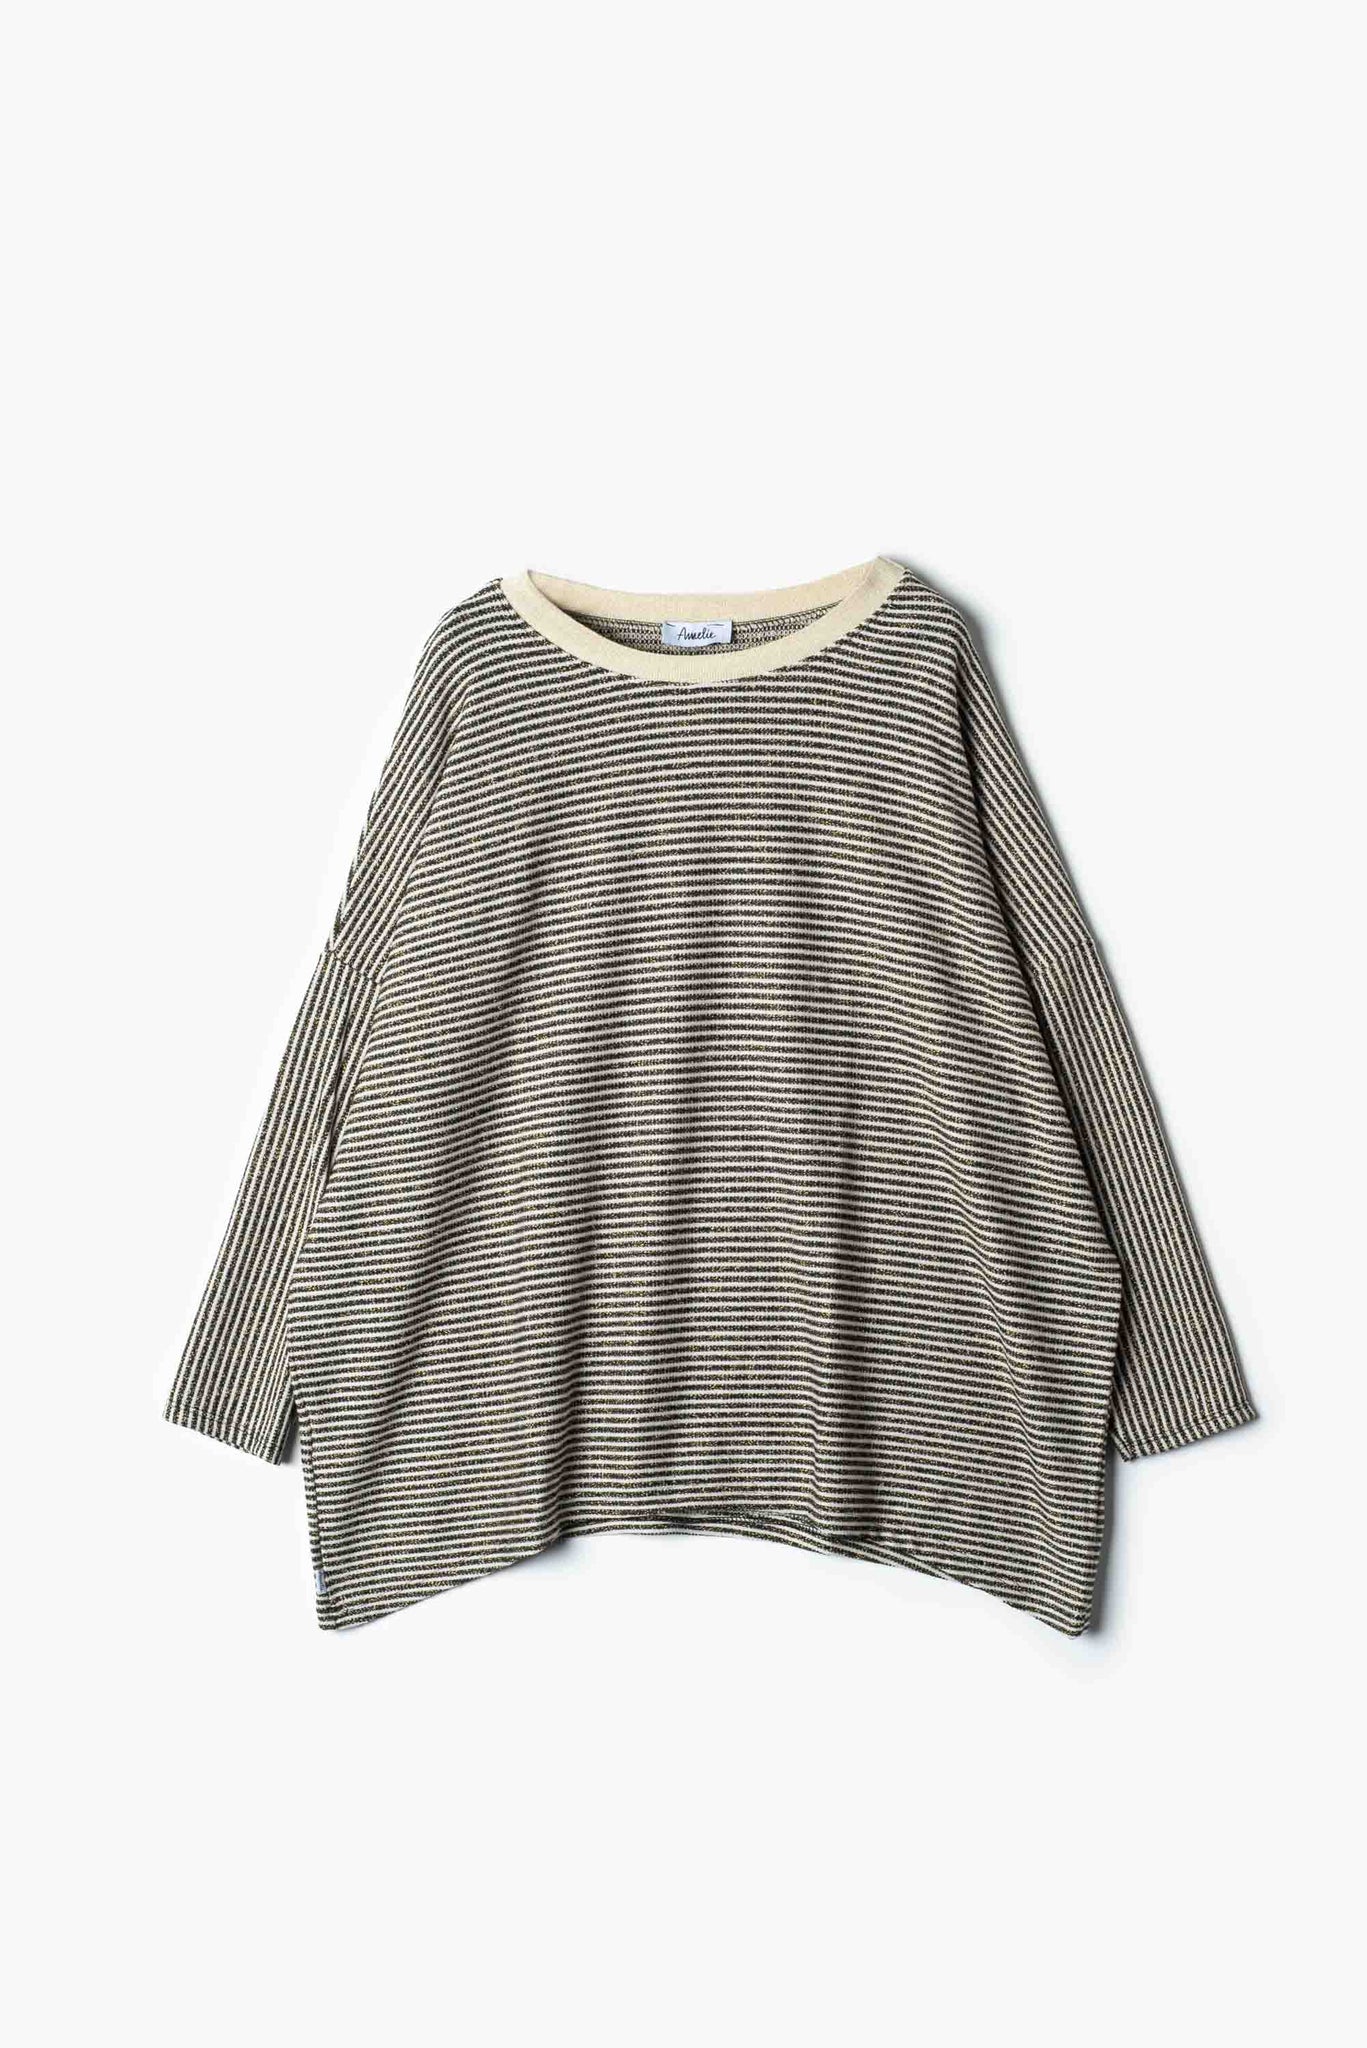 Top Over in lurex knit.